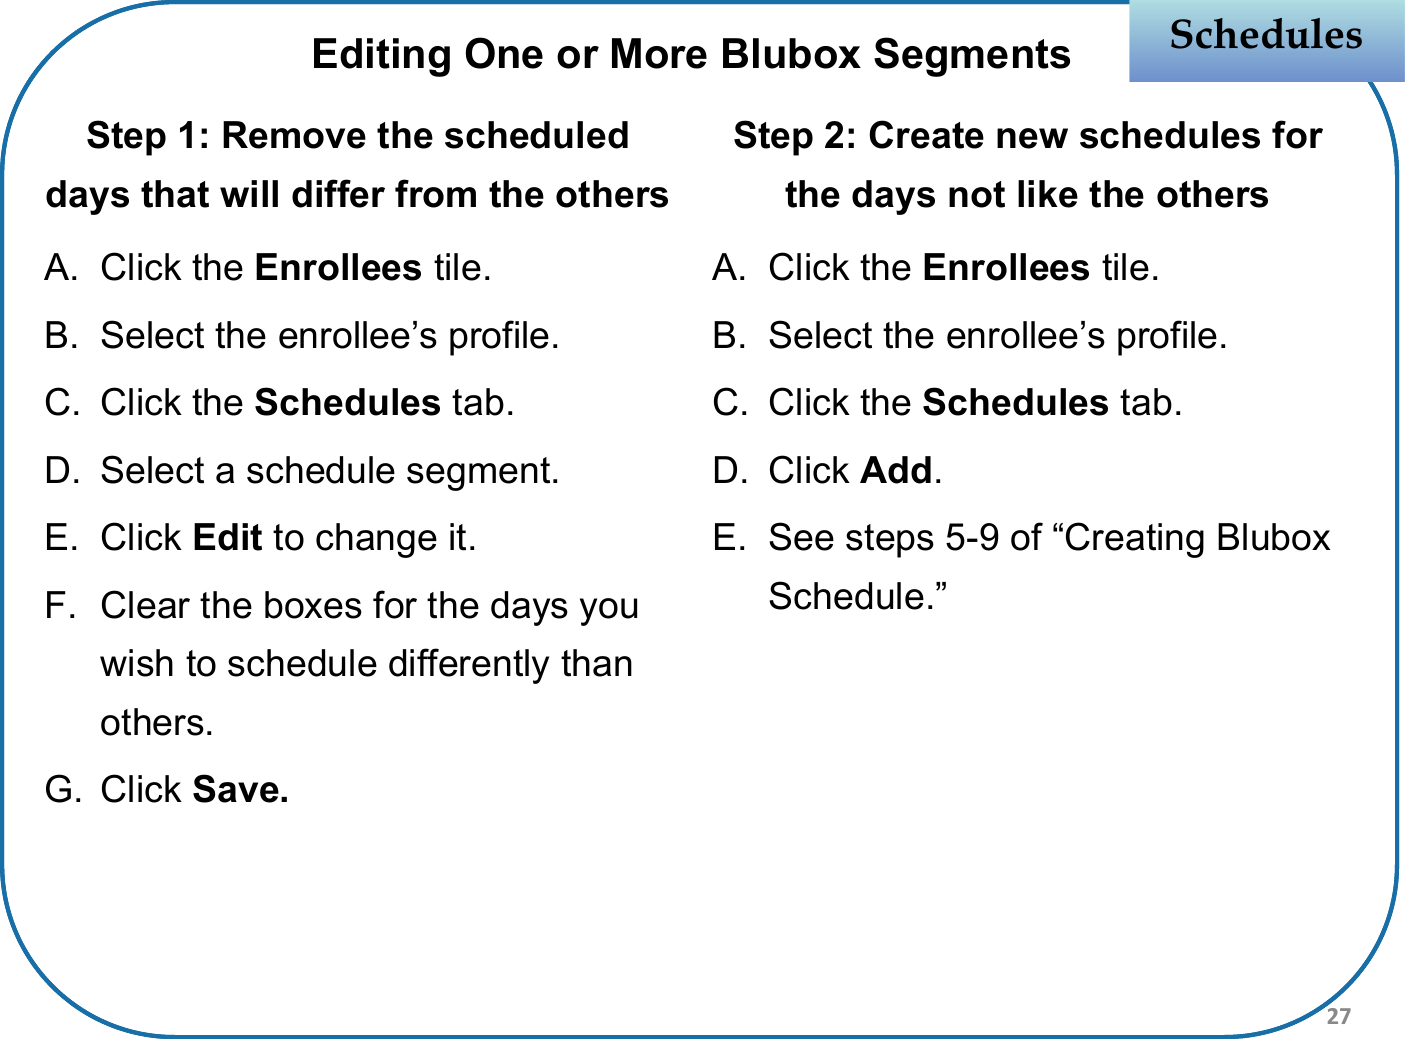 Step 1: Remove the scheduled days that will differ from the othersA. Click the Enrollees tile.B. Select the enrollee’s profile.C. Click the Schedules tab.D. Select a schedule segment.E. Click Edit to change it.F. Clear the boxes for the days you wish to schedule differently than others.G. Click Save.Step 2: Create new schedules for the days not like the othersA. Click the Enrollees tile.B. Select the enrollee’s profile.C. Click the Schedules tab.D. Click Add.E. See steps 5-9 of “Creating Blubox Schedule.”SchedulesSchedulesEditing One or More Blubox Segments27